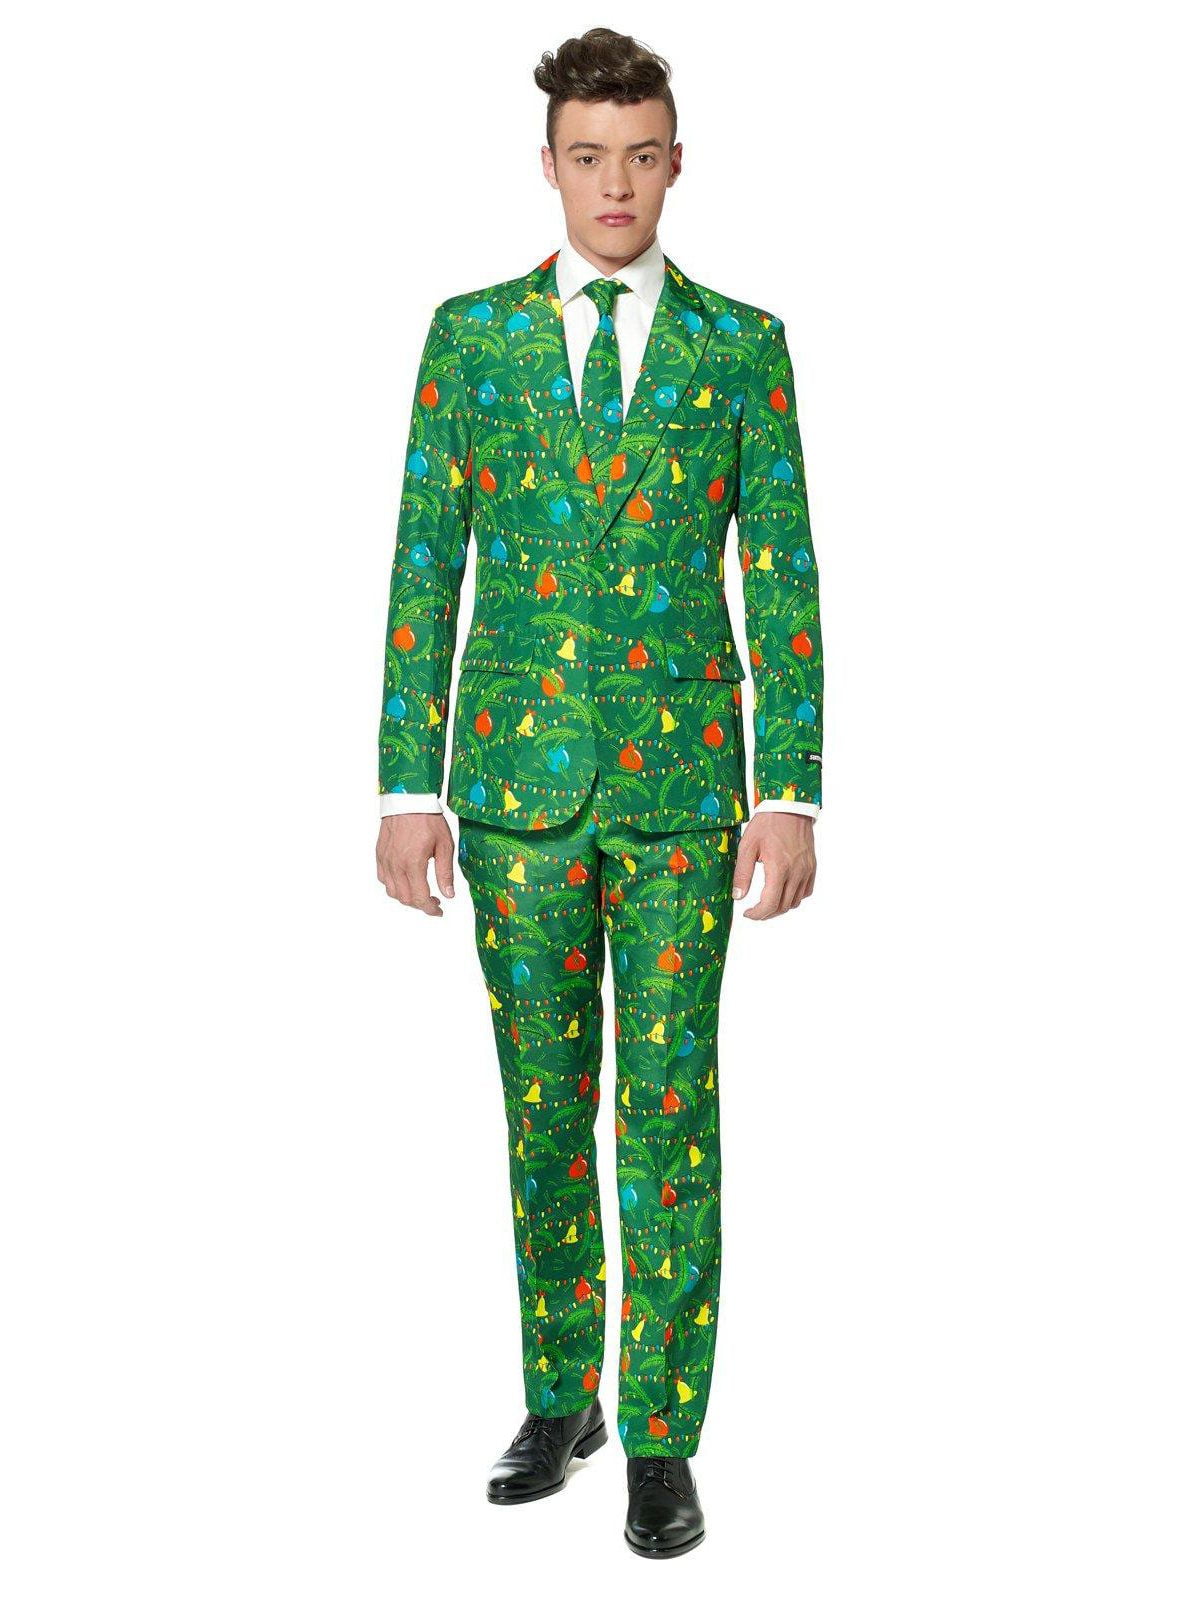 Mens SuitMeister Green Nordic Christmas Suit - simplyfancydress.co.uk